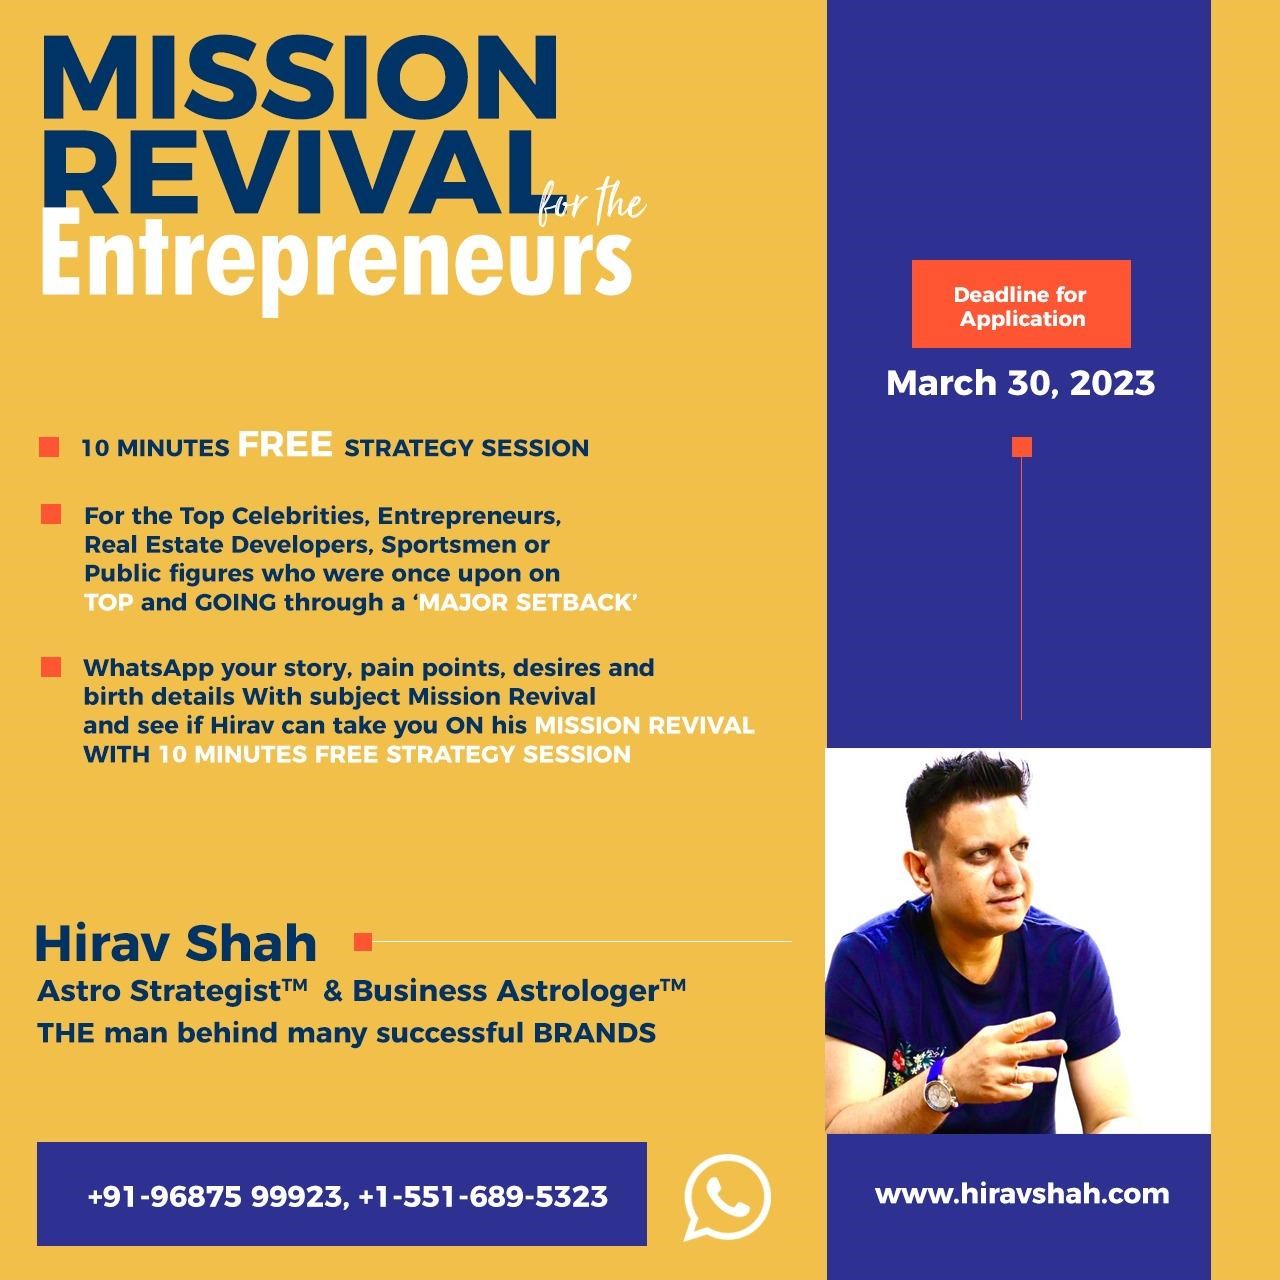 Renowned Astro Business Strategist Hirav Shah Is On A Mission Revival Offering 10 Minutes Free Strategy Session For All Entrepreneurs